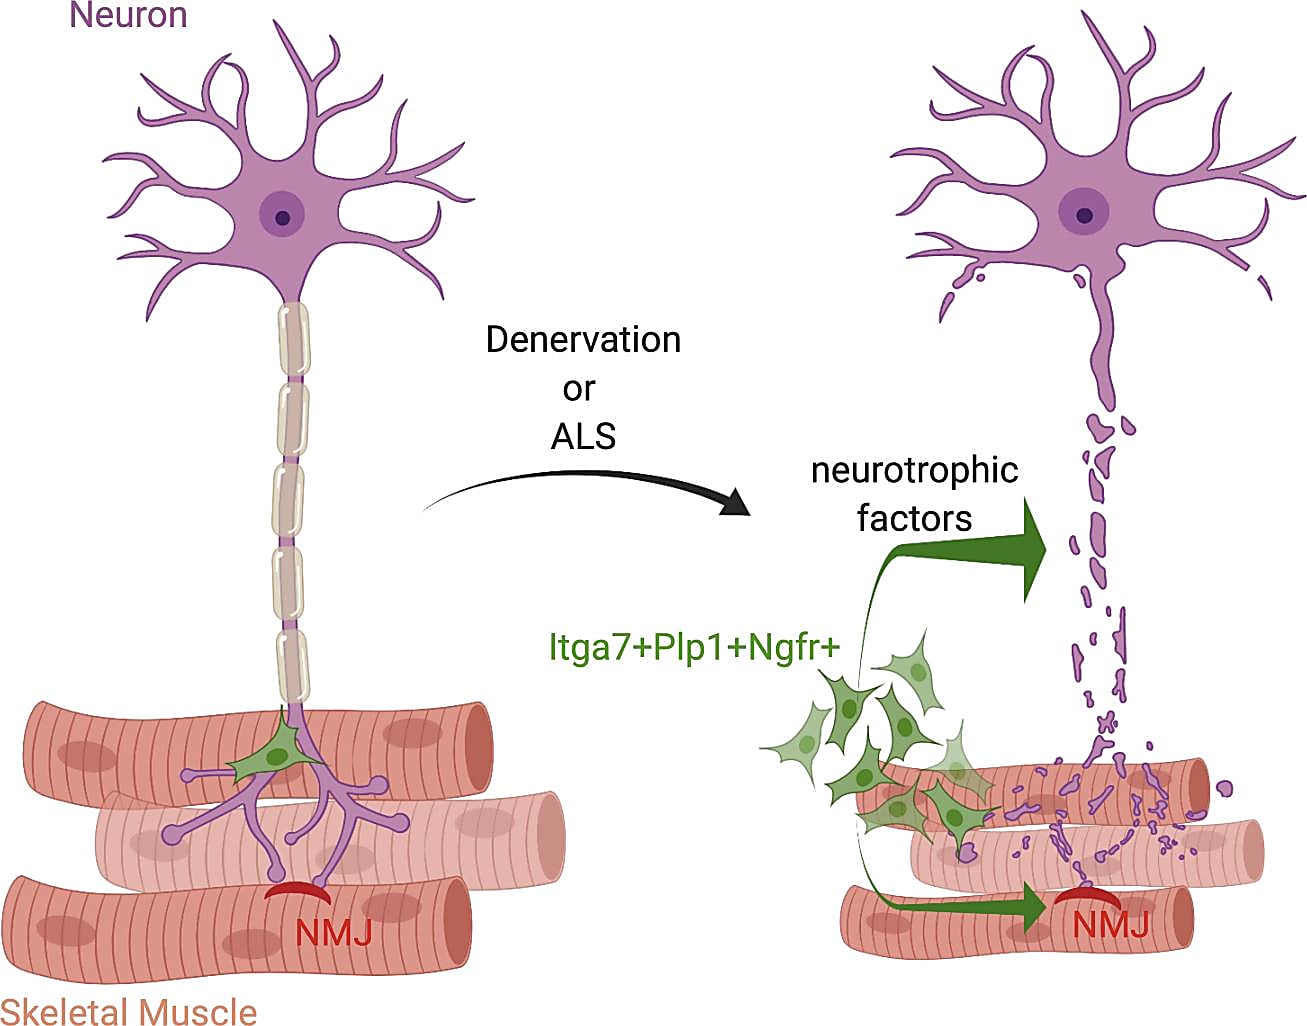 Depiction of skeletal muscle nerve injury and the subsequent neurotrophic factor response involved in repairing the neuromuscular junction. Credit: Proietti D, et al. JCI Insight 6(7): e143469 (2021).